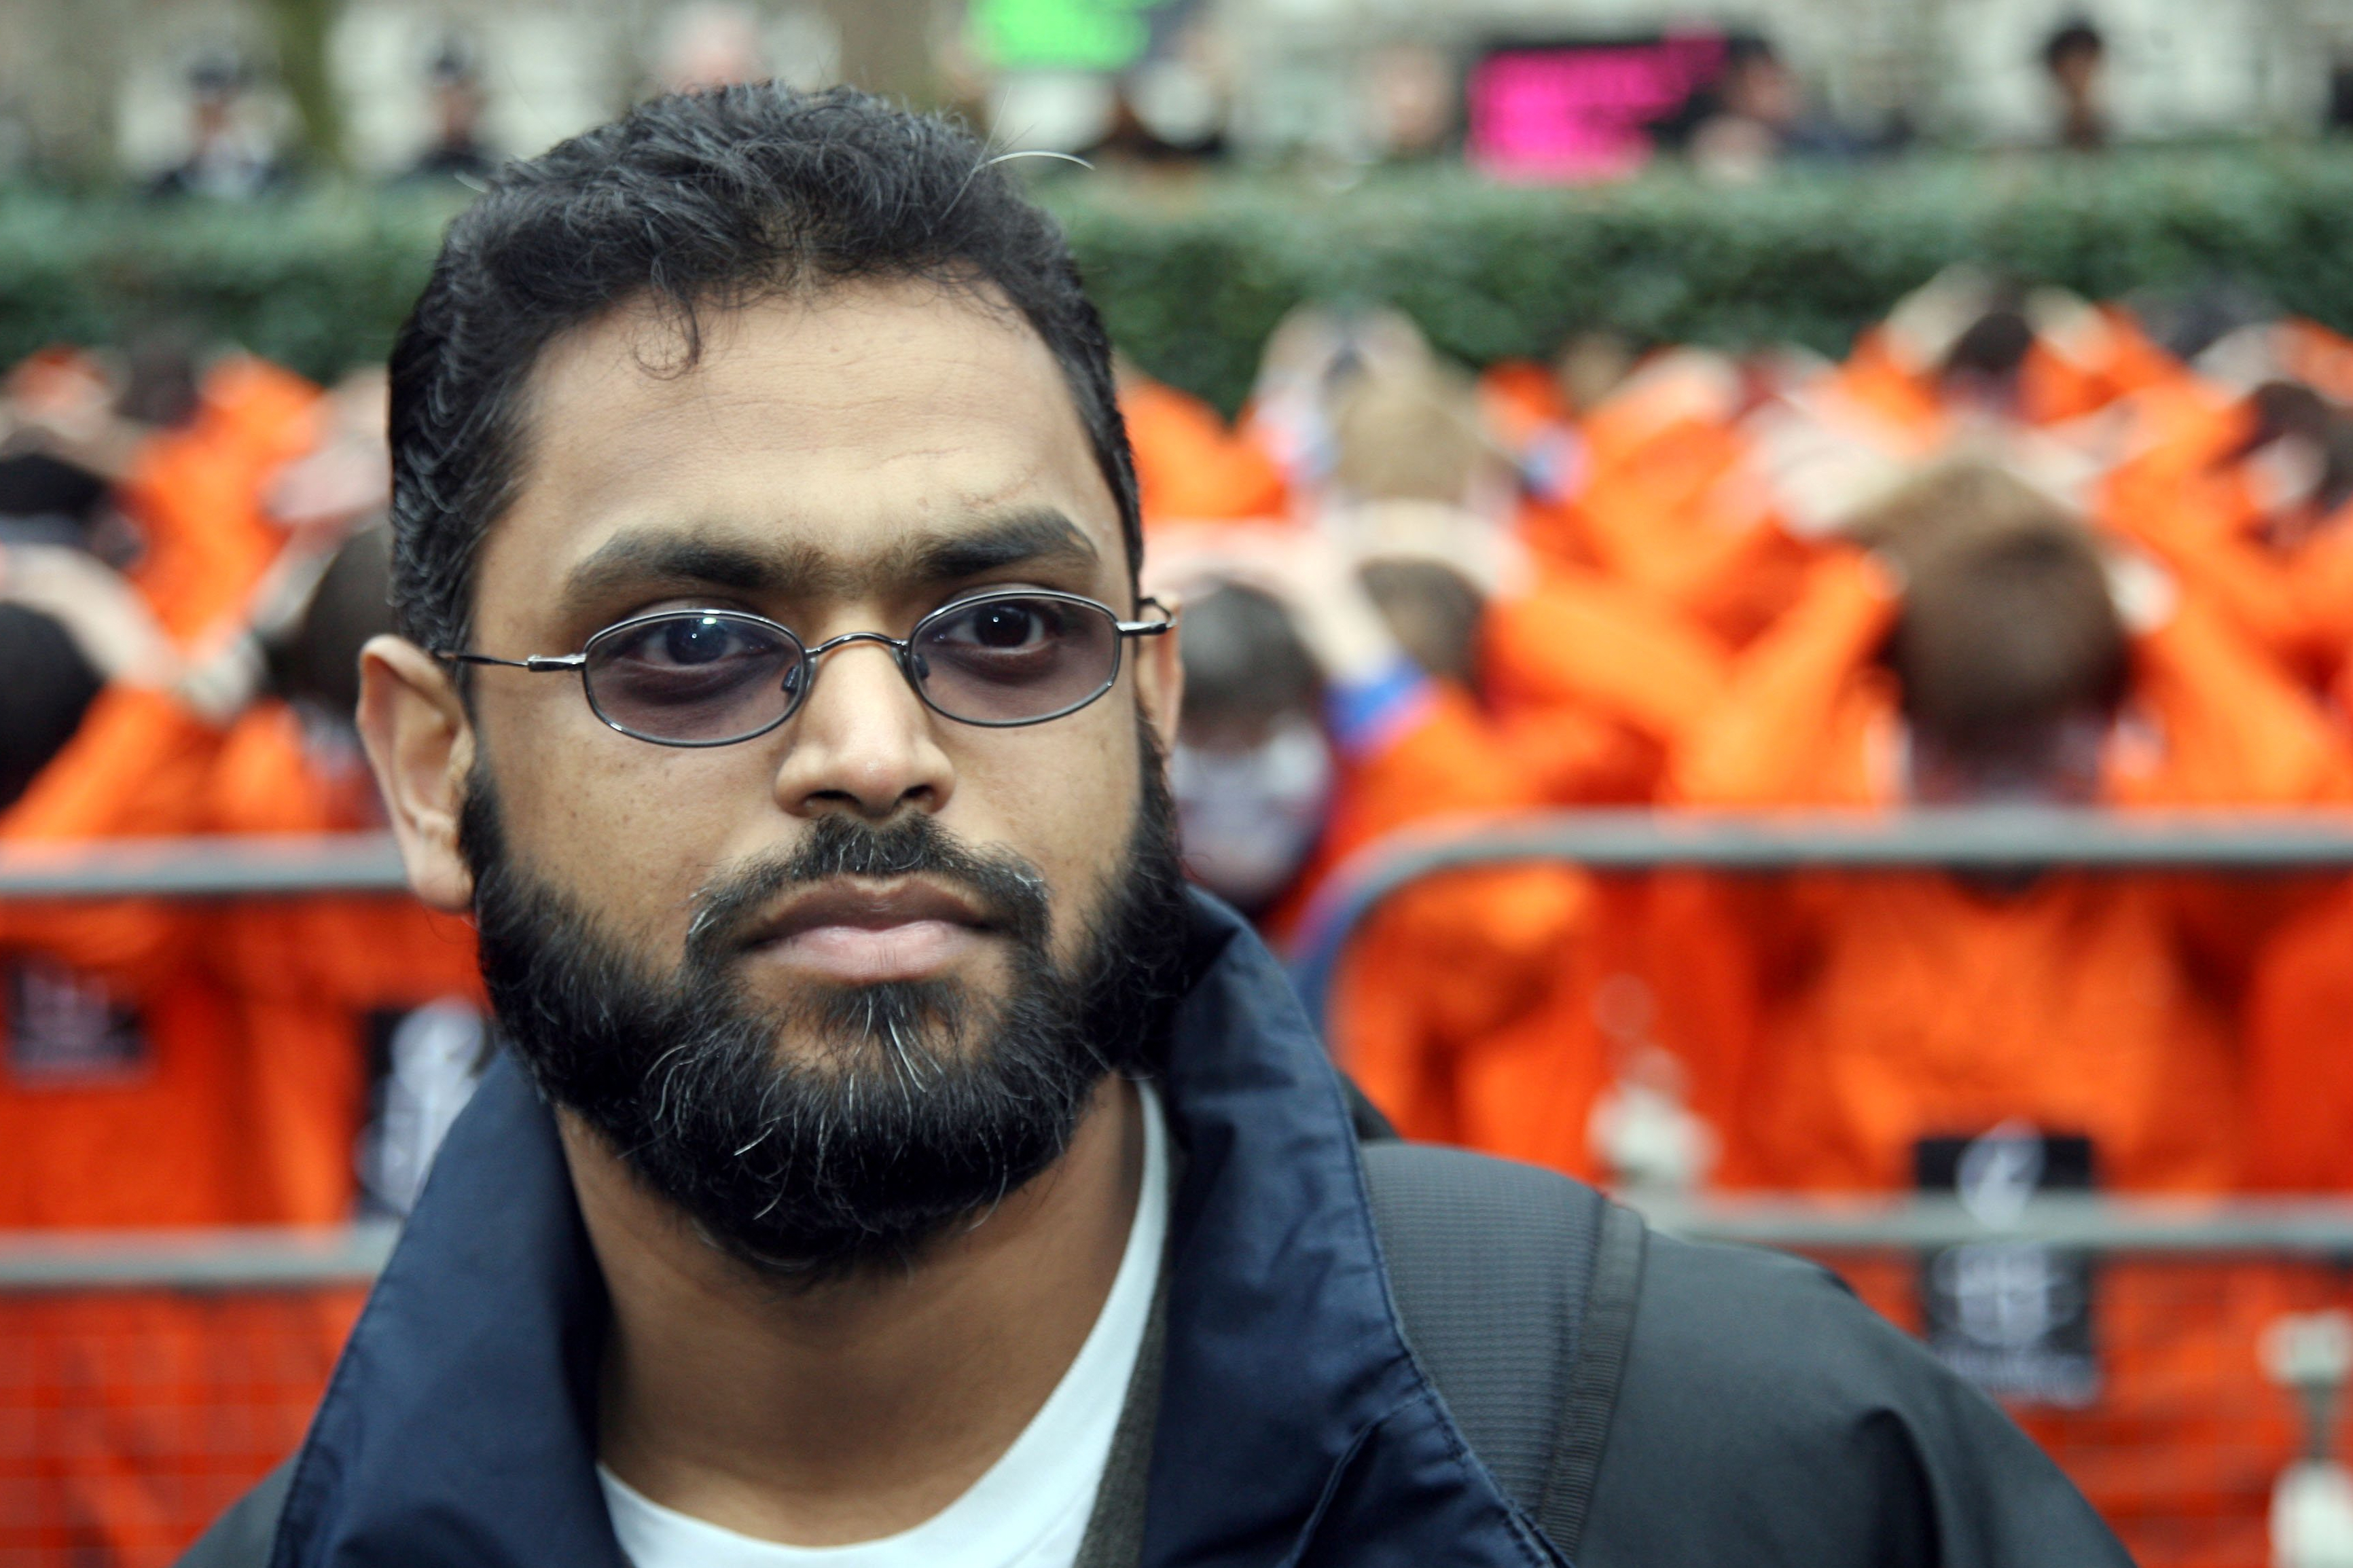 Live Blog: Moazzam Begg talking at Kingston University on ‘Confronting the Rise to Racism’